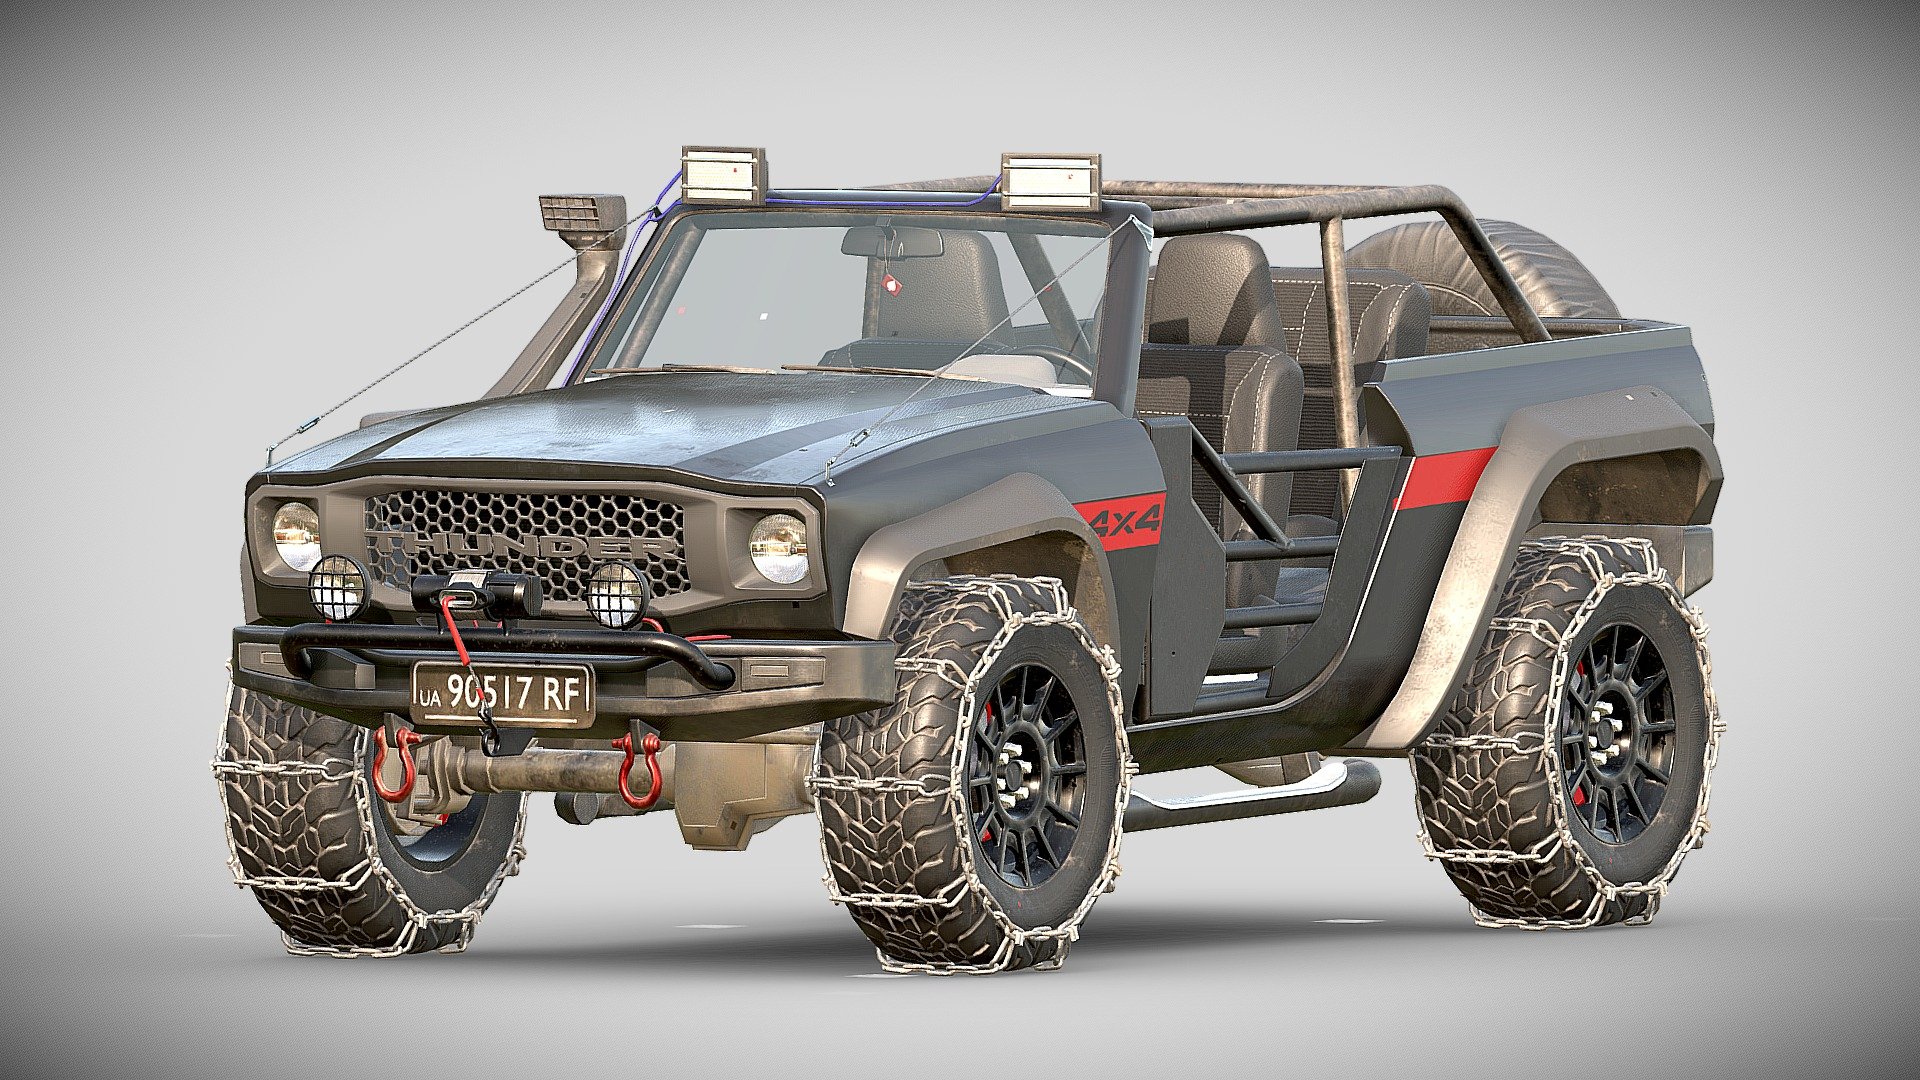 AAA Realistic and Game-ready model of a Generic SUV

This Suv is fully brandless and generic so it can be used in any project without any righ claim issues

It has PBR textures in JPG format with the following layouts:

Exterior(4096x4096)— Basecolor, Metallic, Roughness, Normals

Interior(2048x2048)— Basecolor, Metallic, Roughness, Normals, Emissive

Tire(2048x2048)— Basecolor, Metallic, Roughness, Normals

OffroadingJit(4096x2048)— Basecolor, Metallic, Roughness, Normals - Generic SUV 4x4 Black - Buy Royalty Free 3D model by rfarencibia 3d model